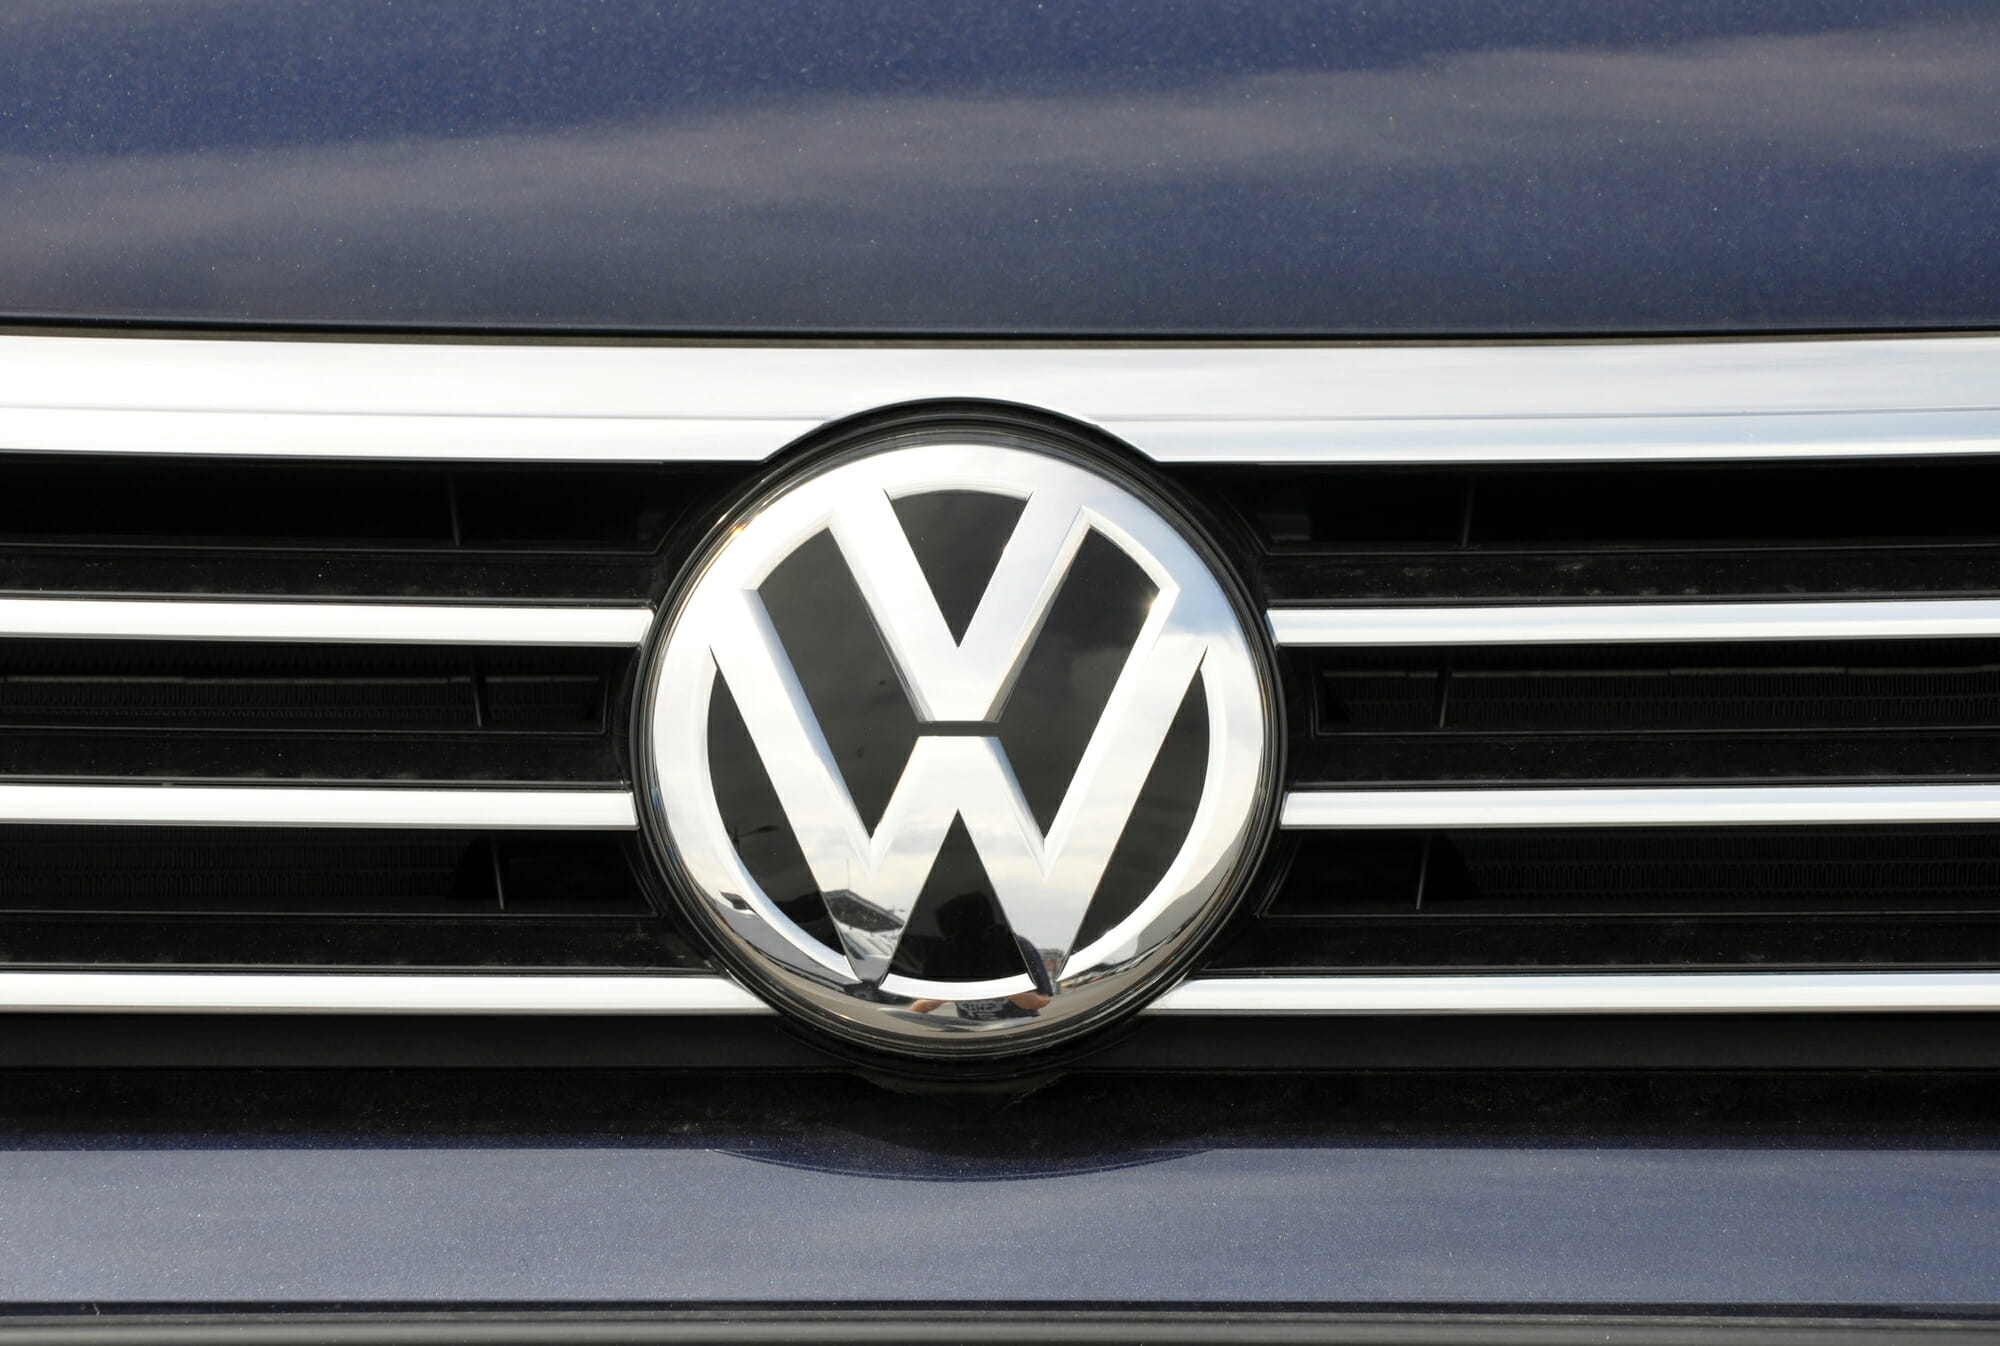 VW Models: Everything You Need to Choose the Right One